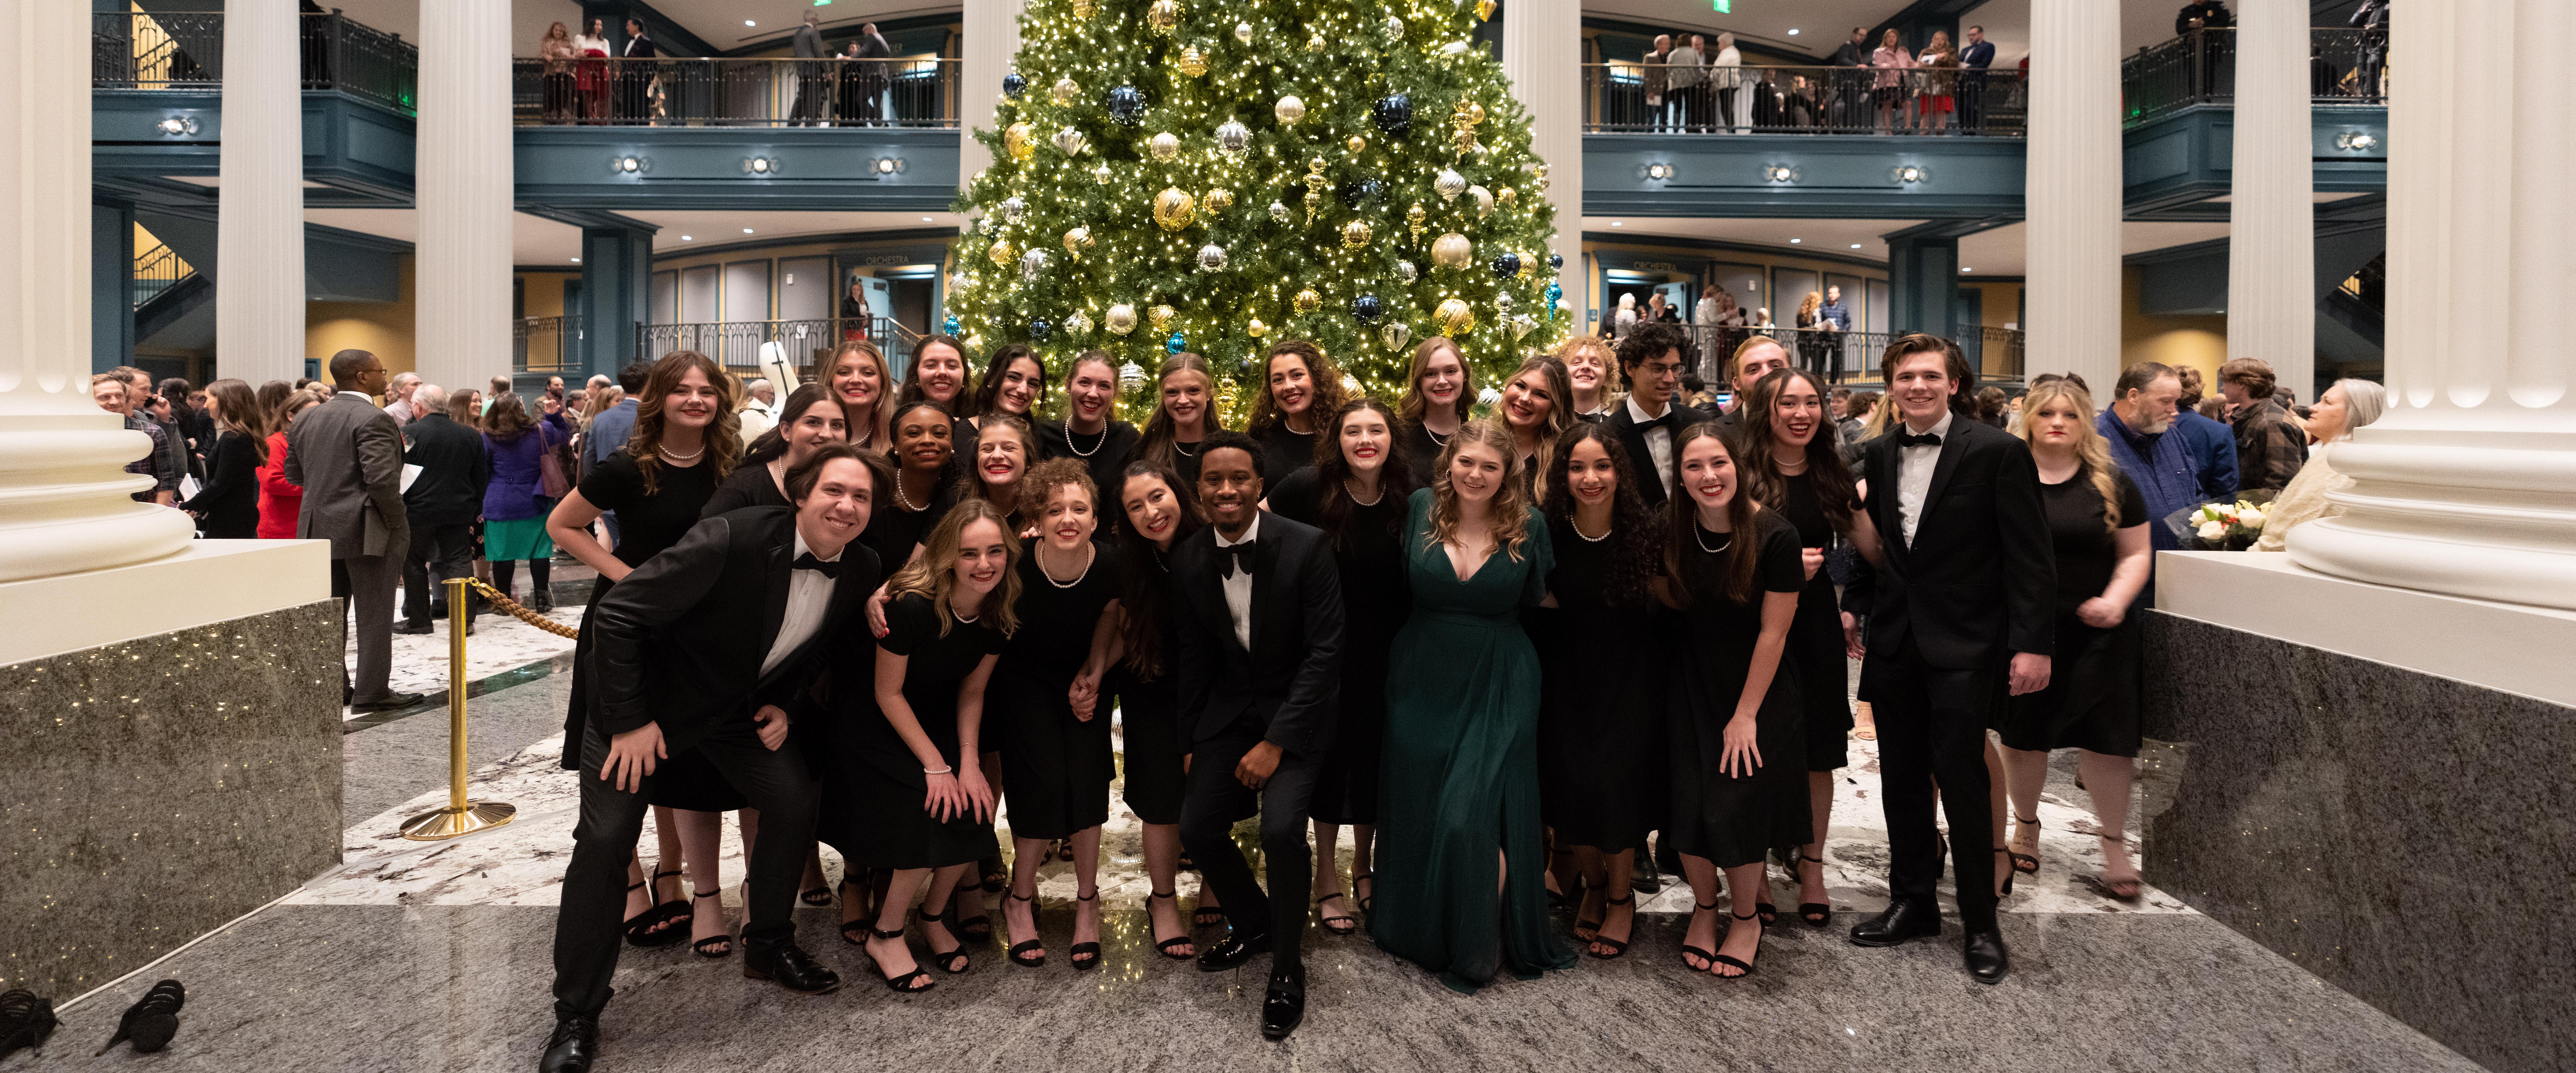 Belmont Choir posing for picture in the fisher center lobby at Christmas time